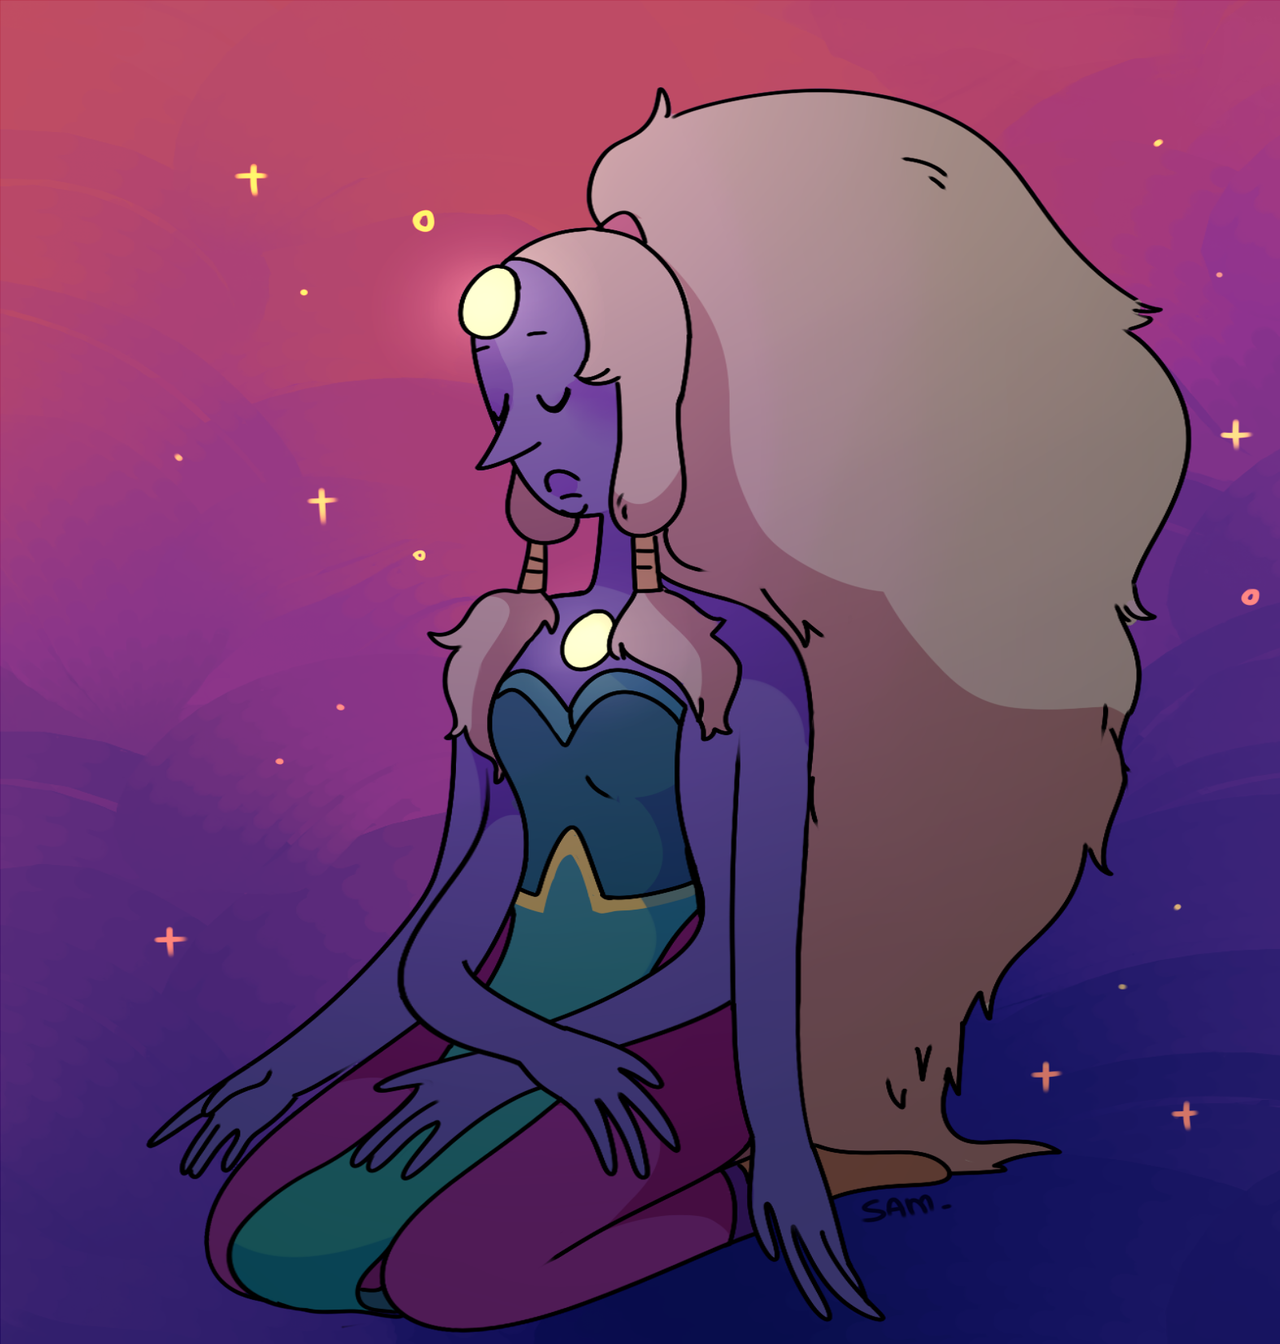 I’m trying with different art styles, so I draw Opal